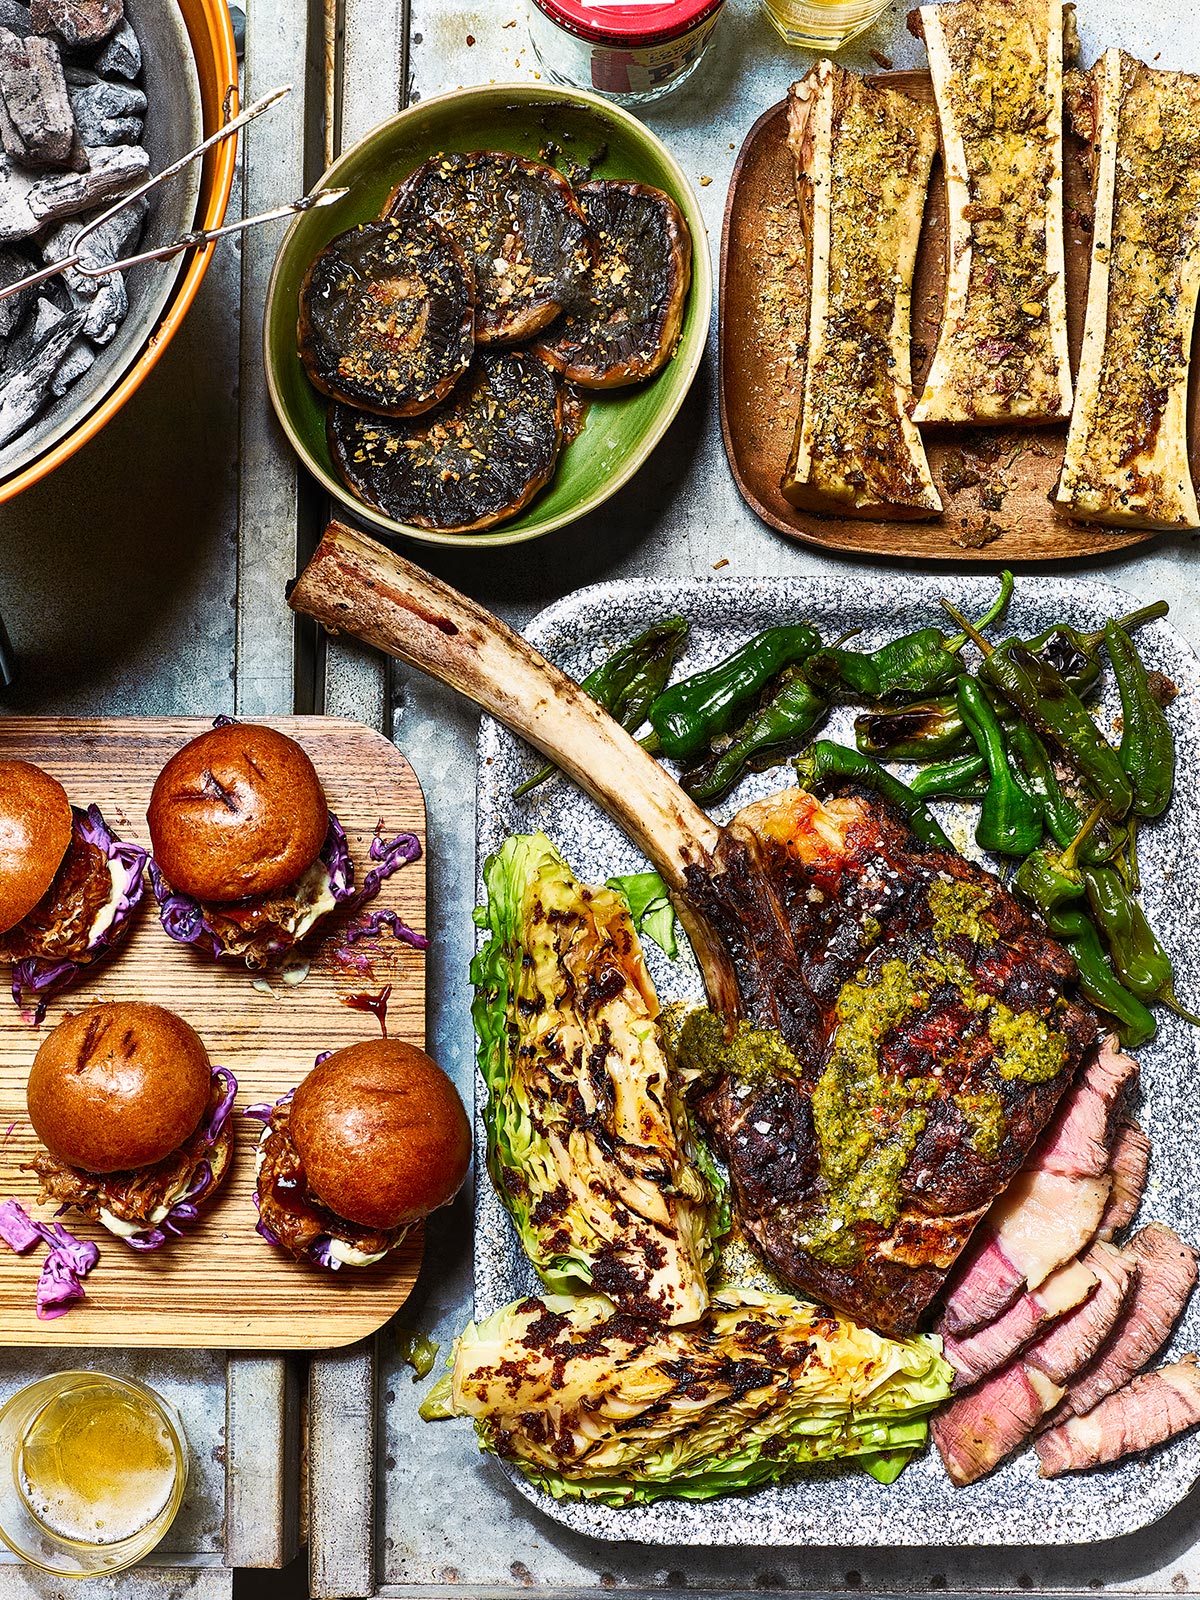 Hoxton Deluxe BBQ Box - Tomahawk Steak, Bone Marrow, Sliders with a selection of sides